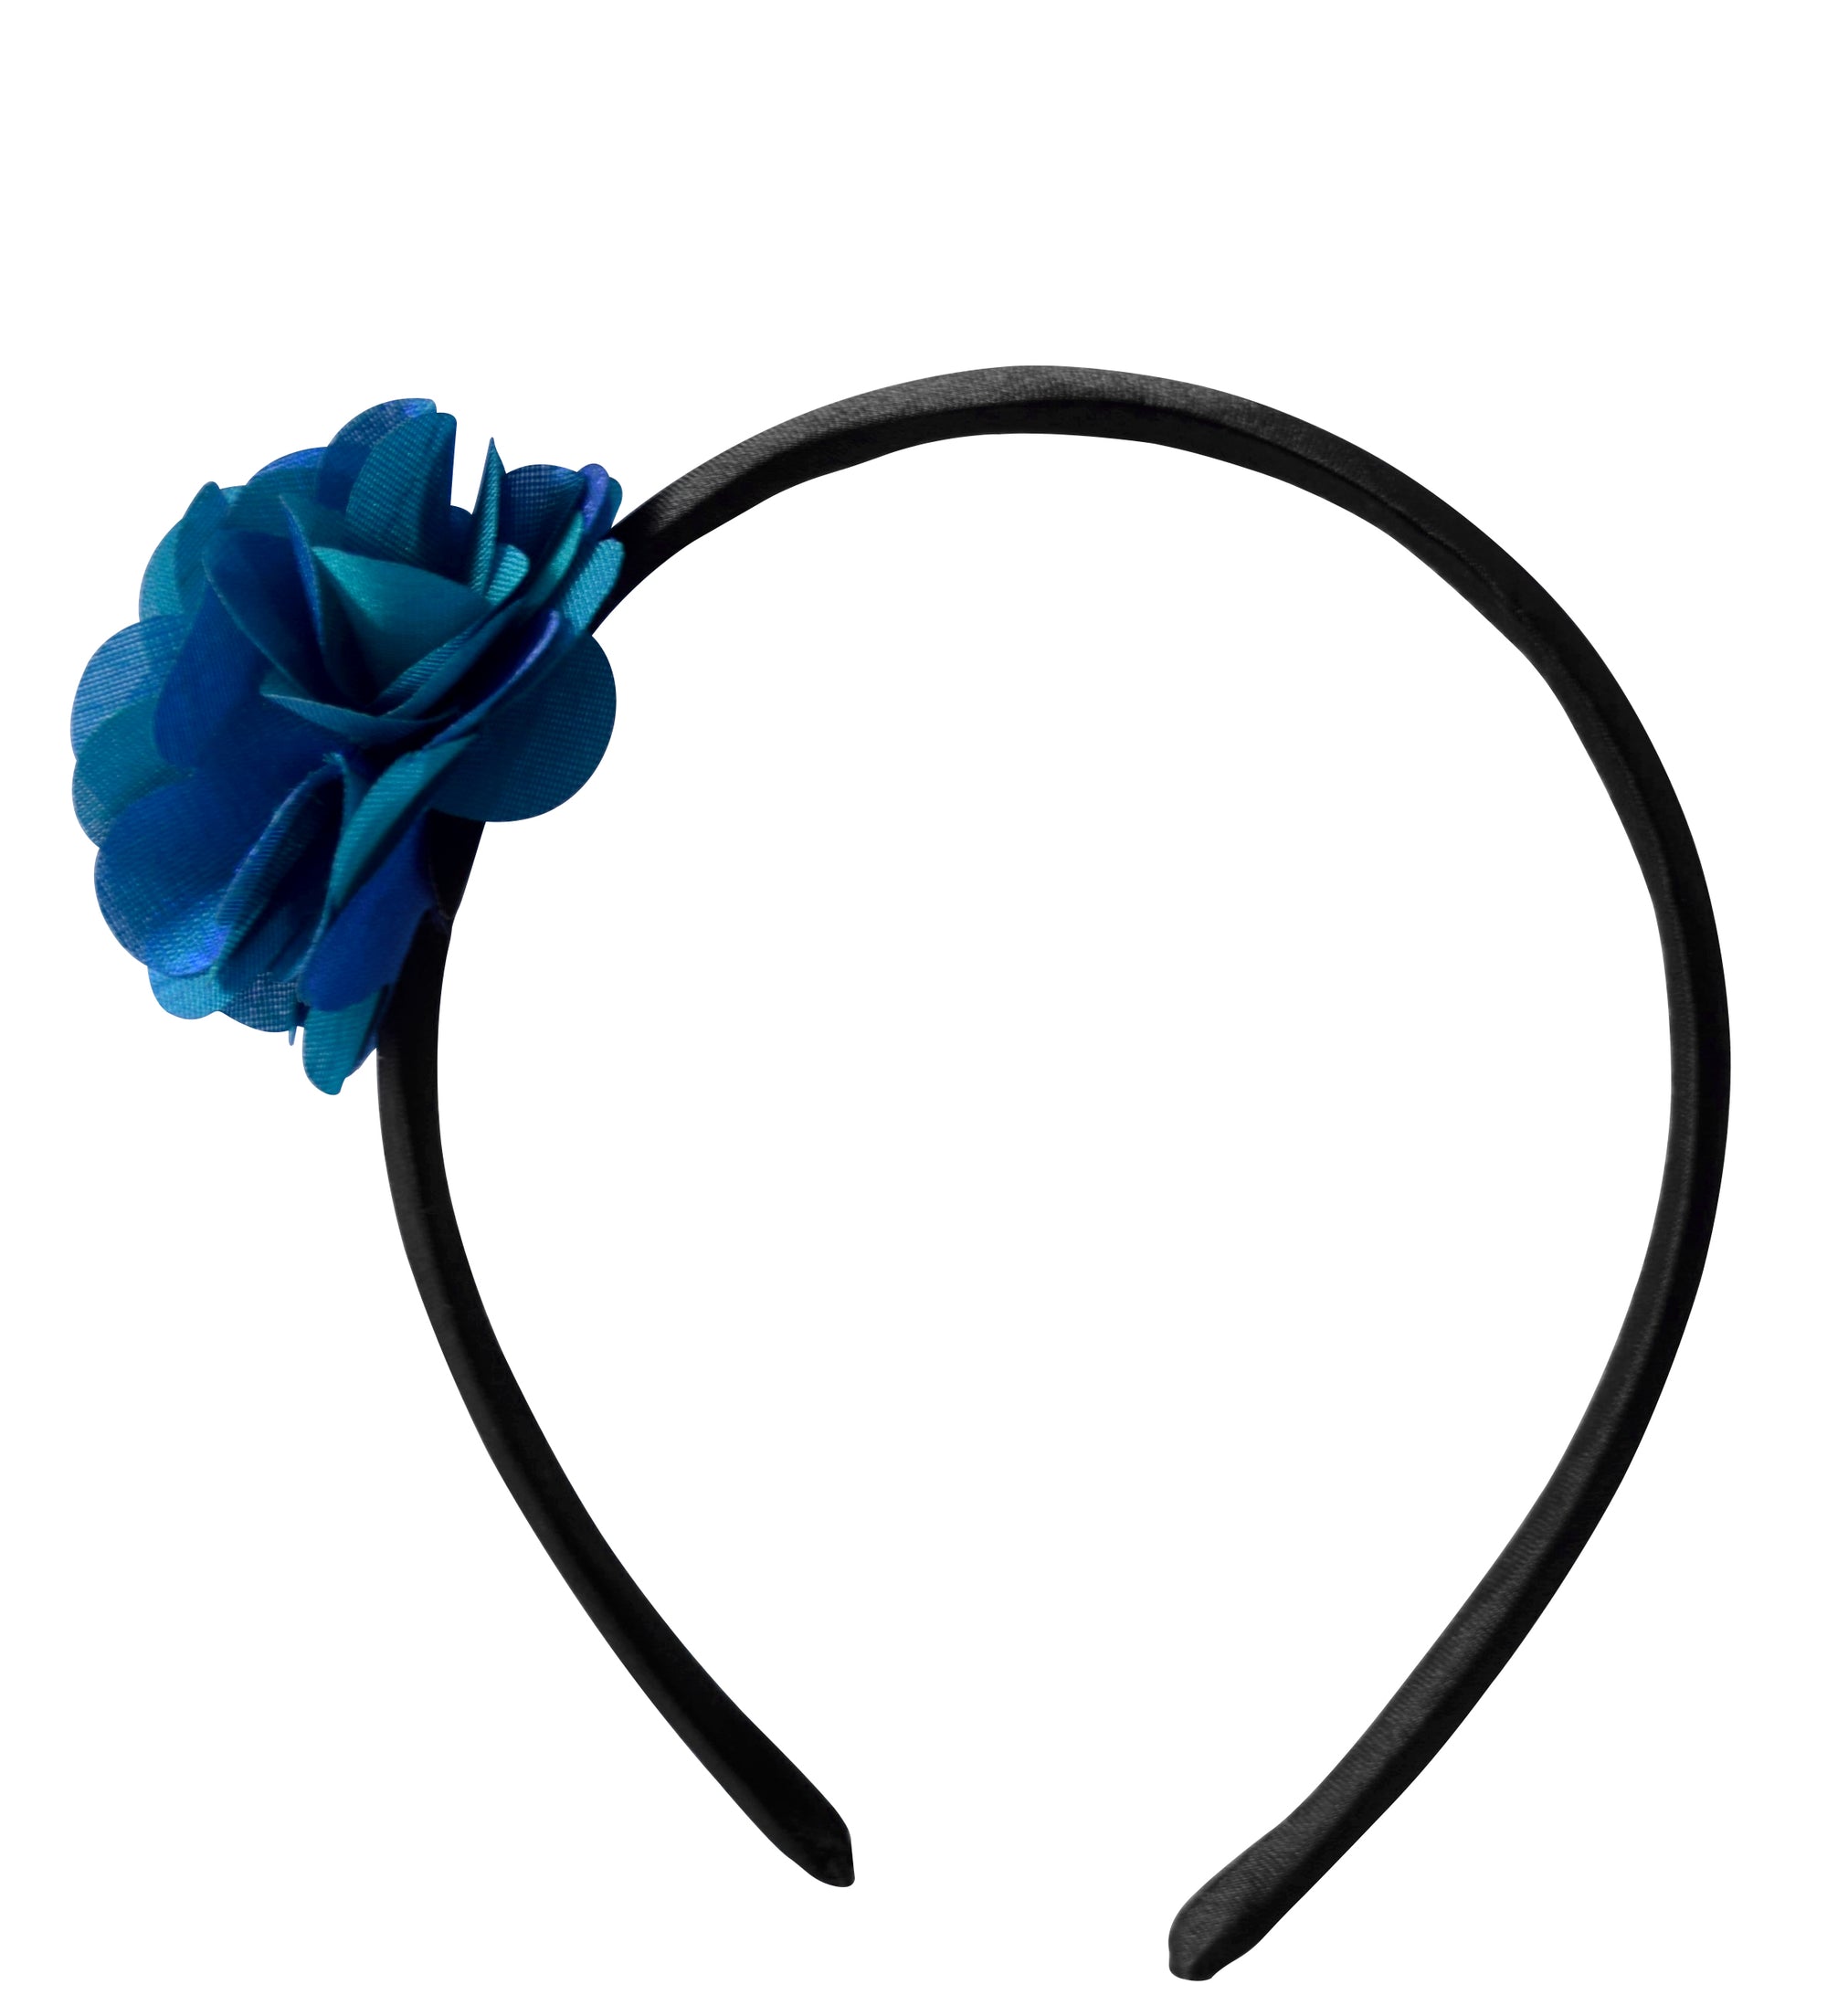 Undertree Premium 30 English Colour Hair Ties Elastic Hair Band Made of  Quality Cotton and No